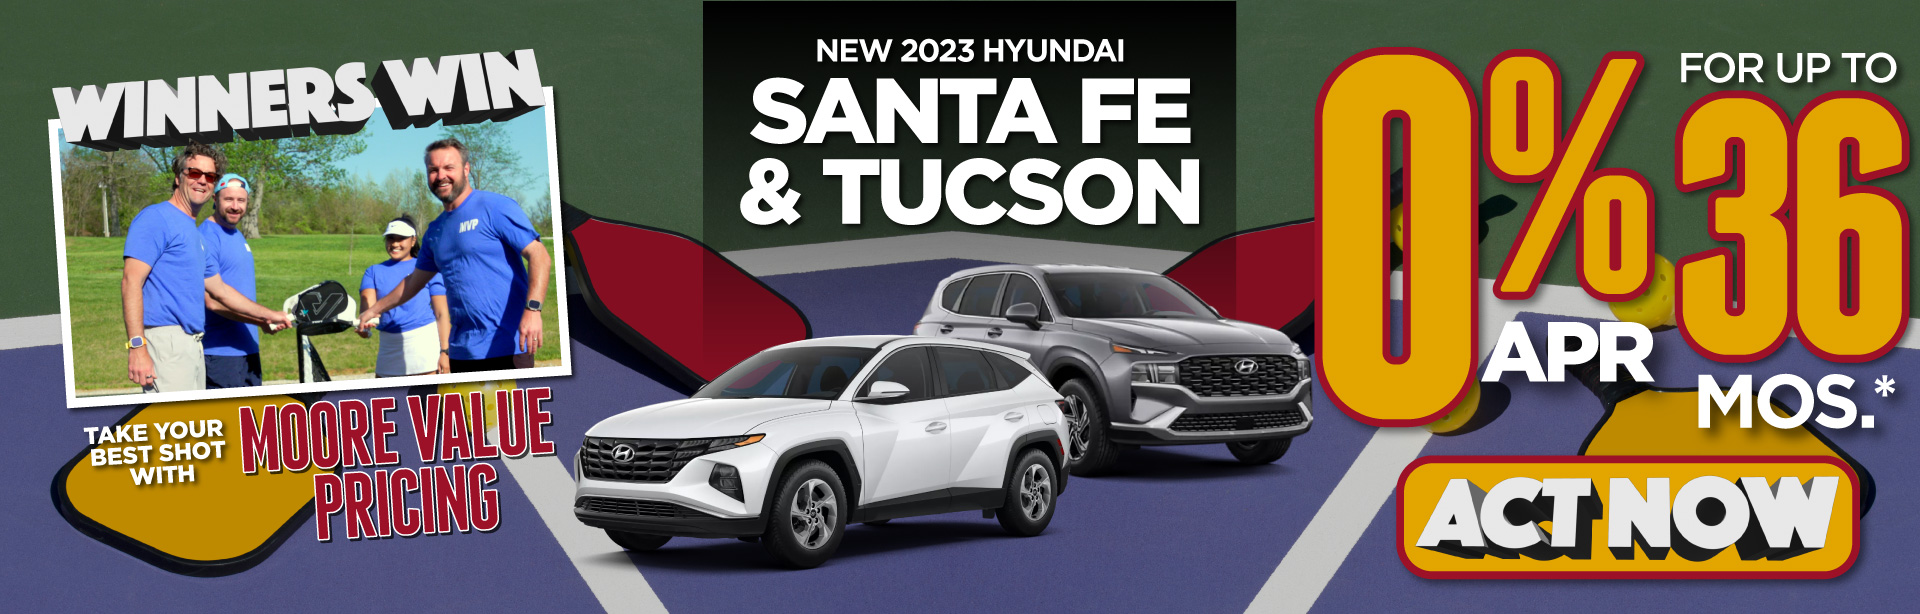 New 2023 Santa Fe & Tucson 0% APR for up to 36 months* | Act Now